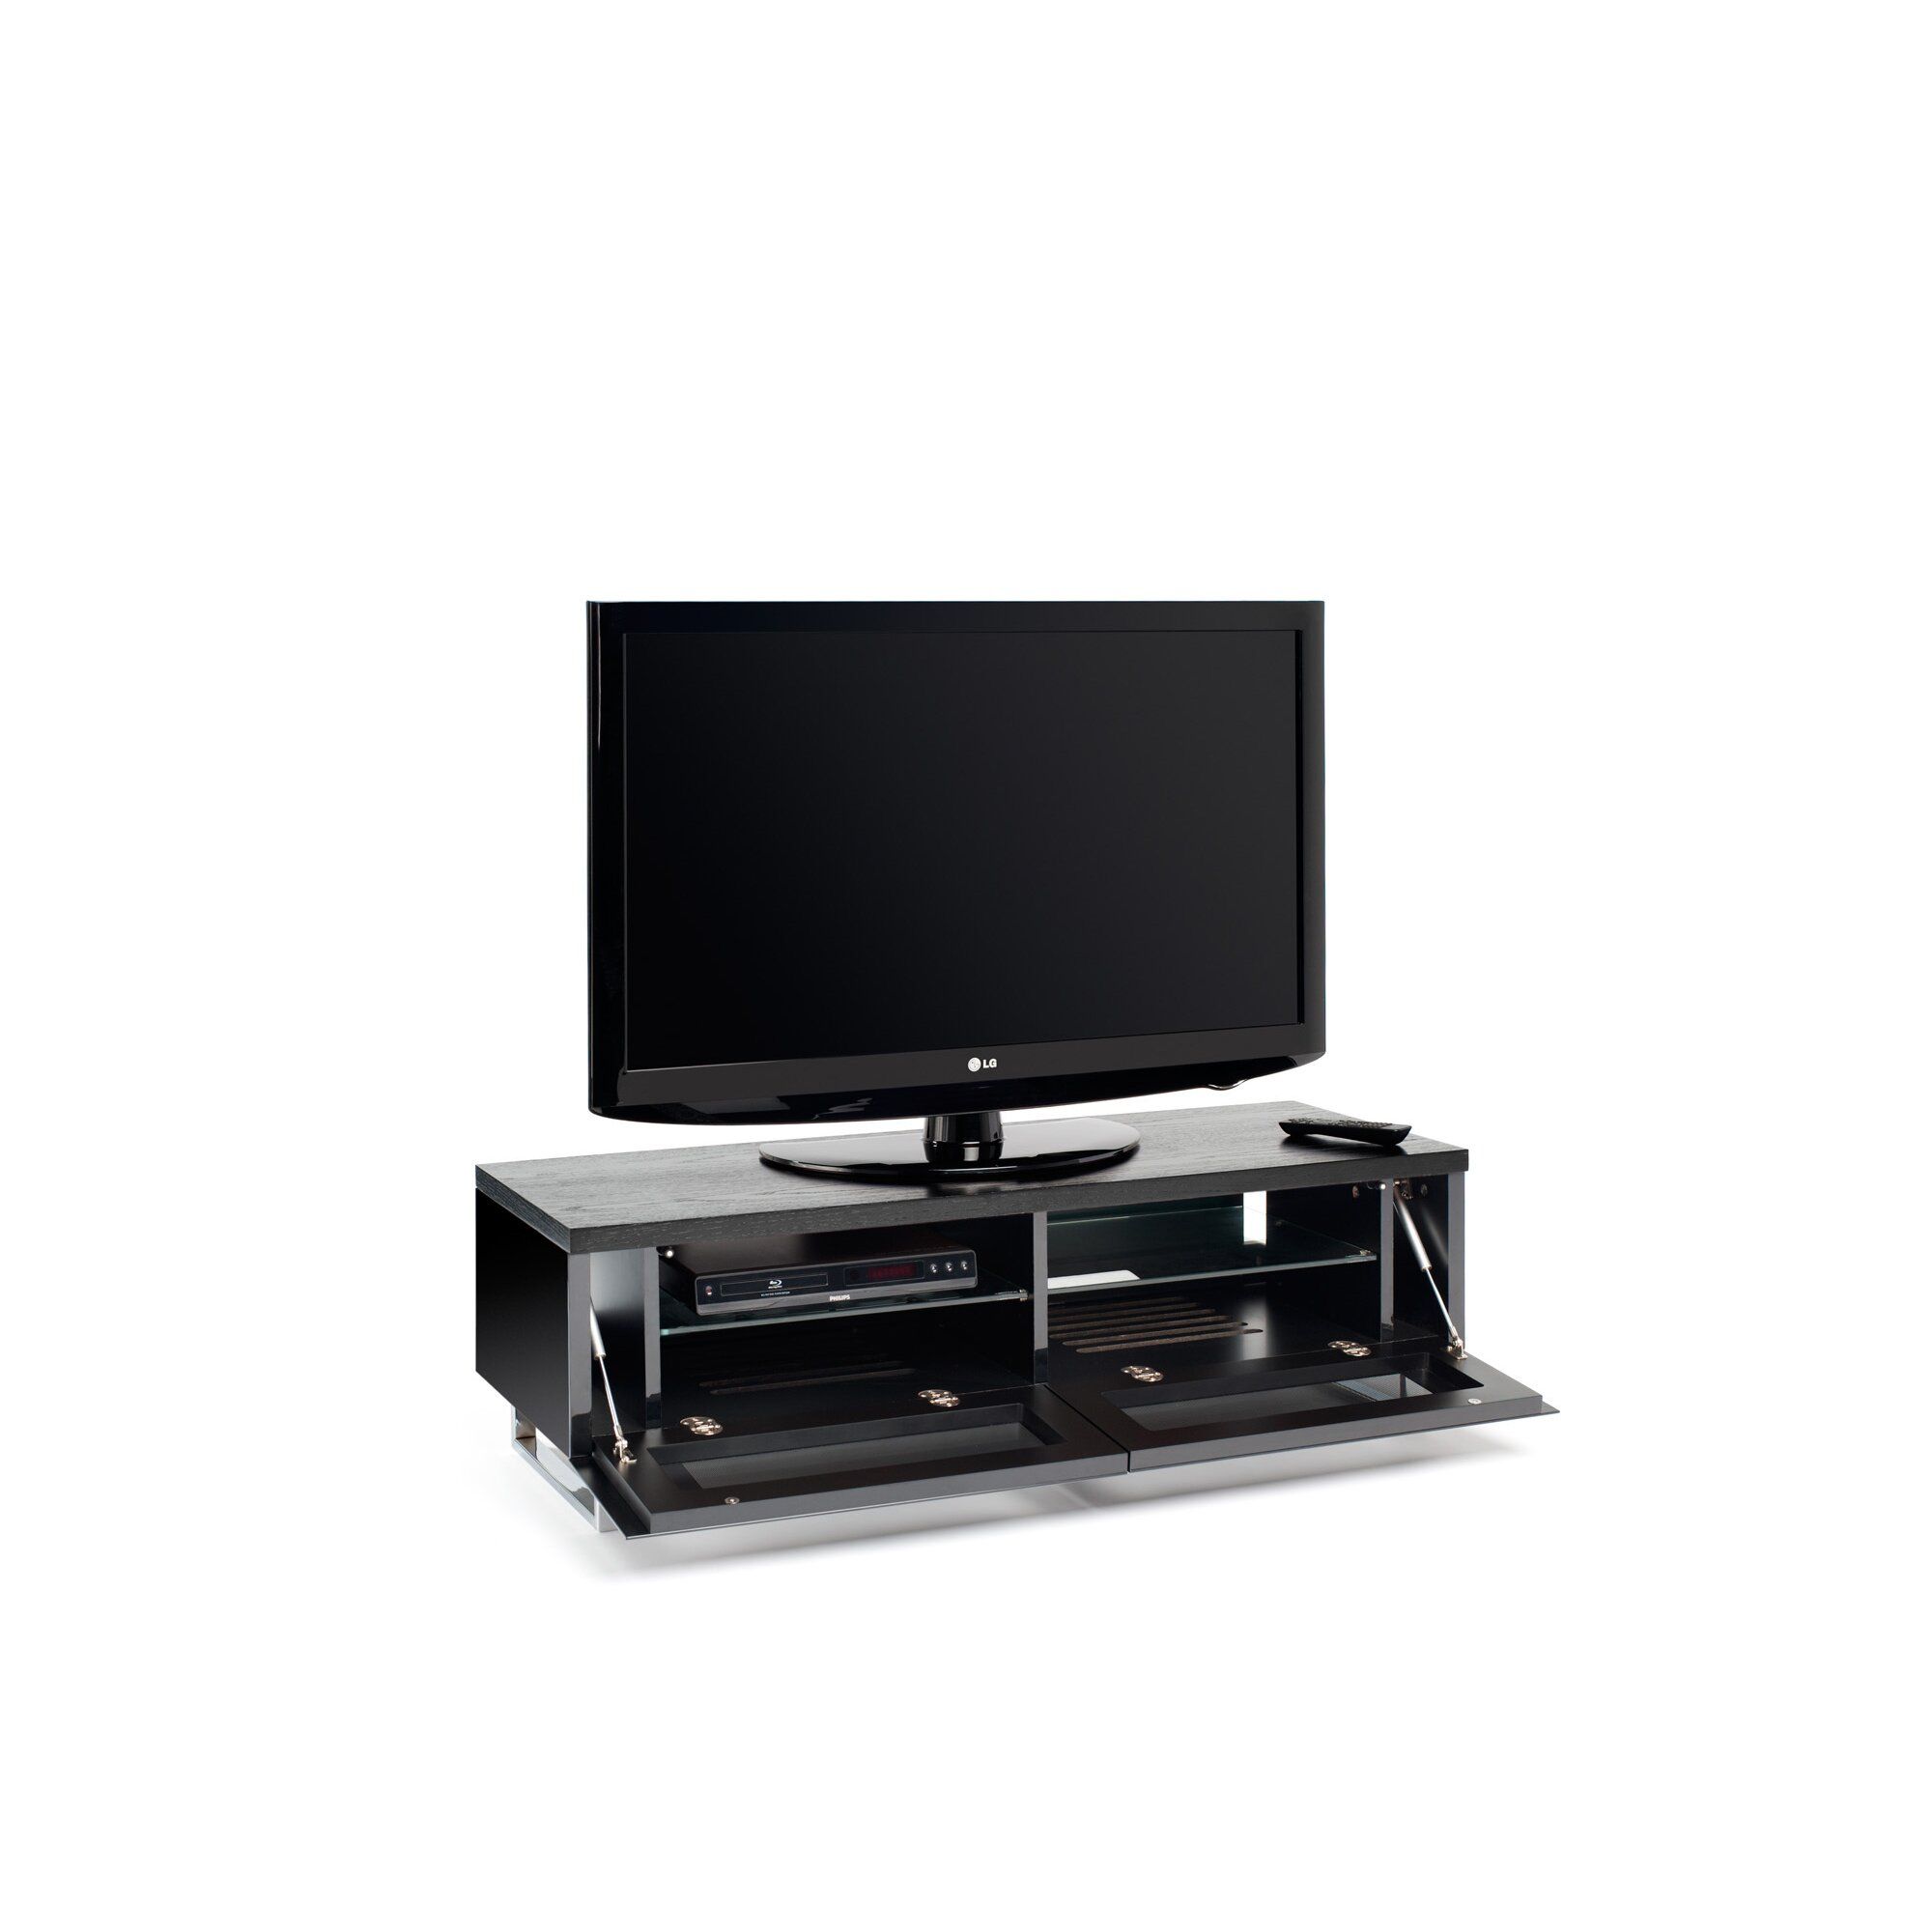 Techlink Panorama Tv Stand & Reviews | Wayfair In Techlink Tv Stands Sale (View 4 of 15)